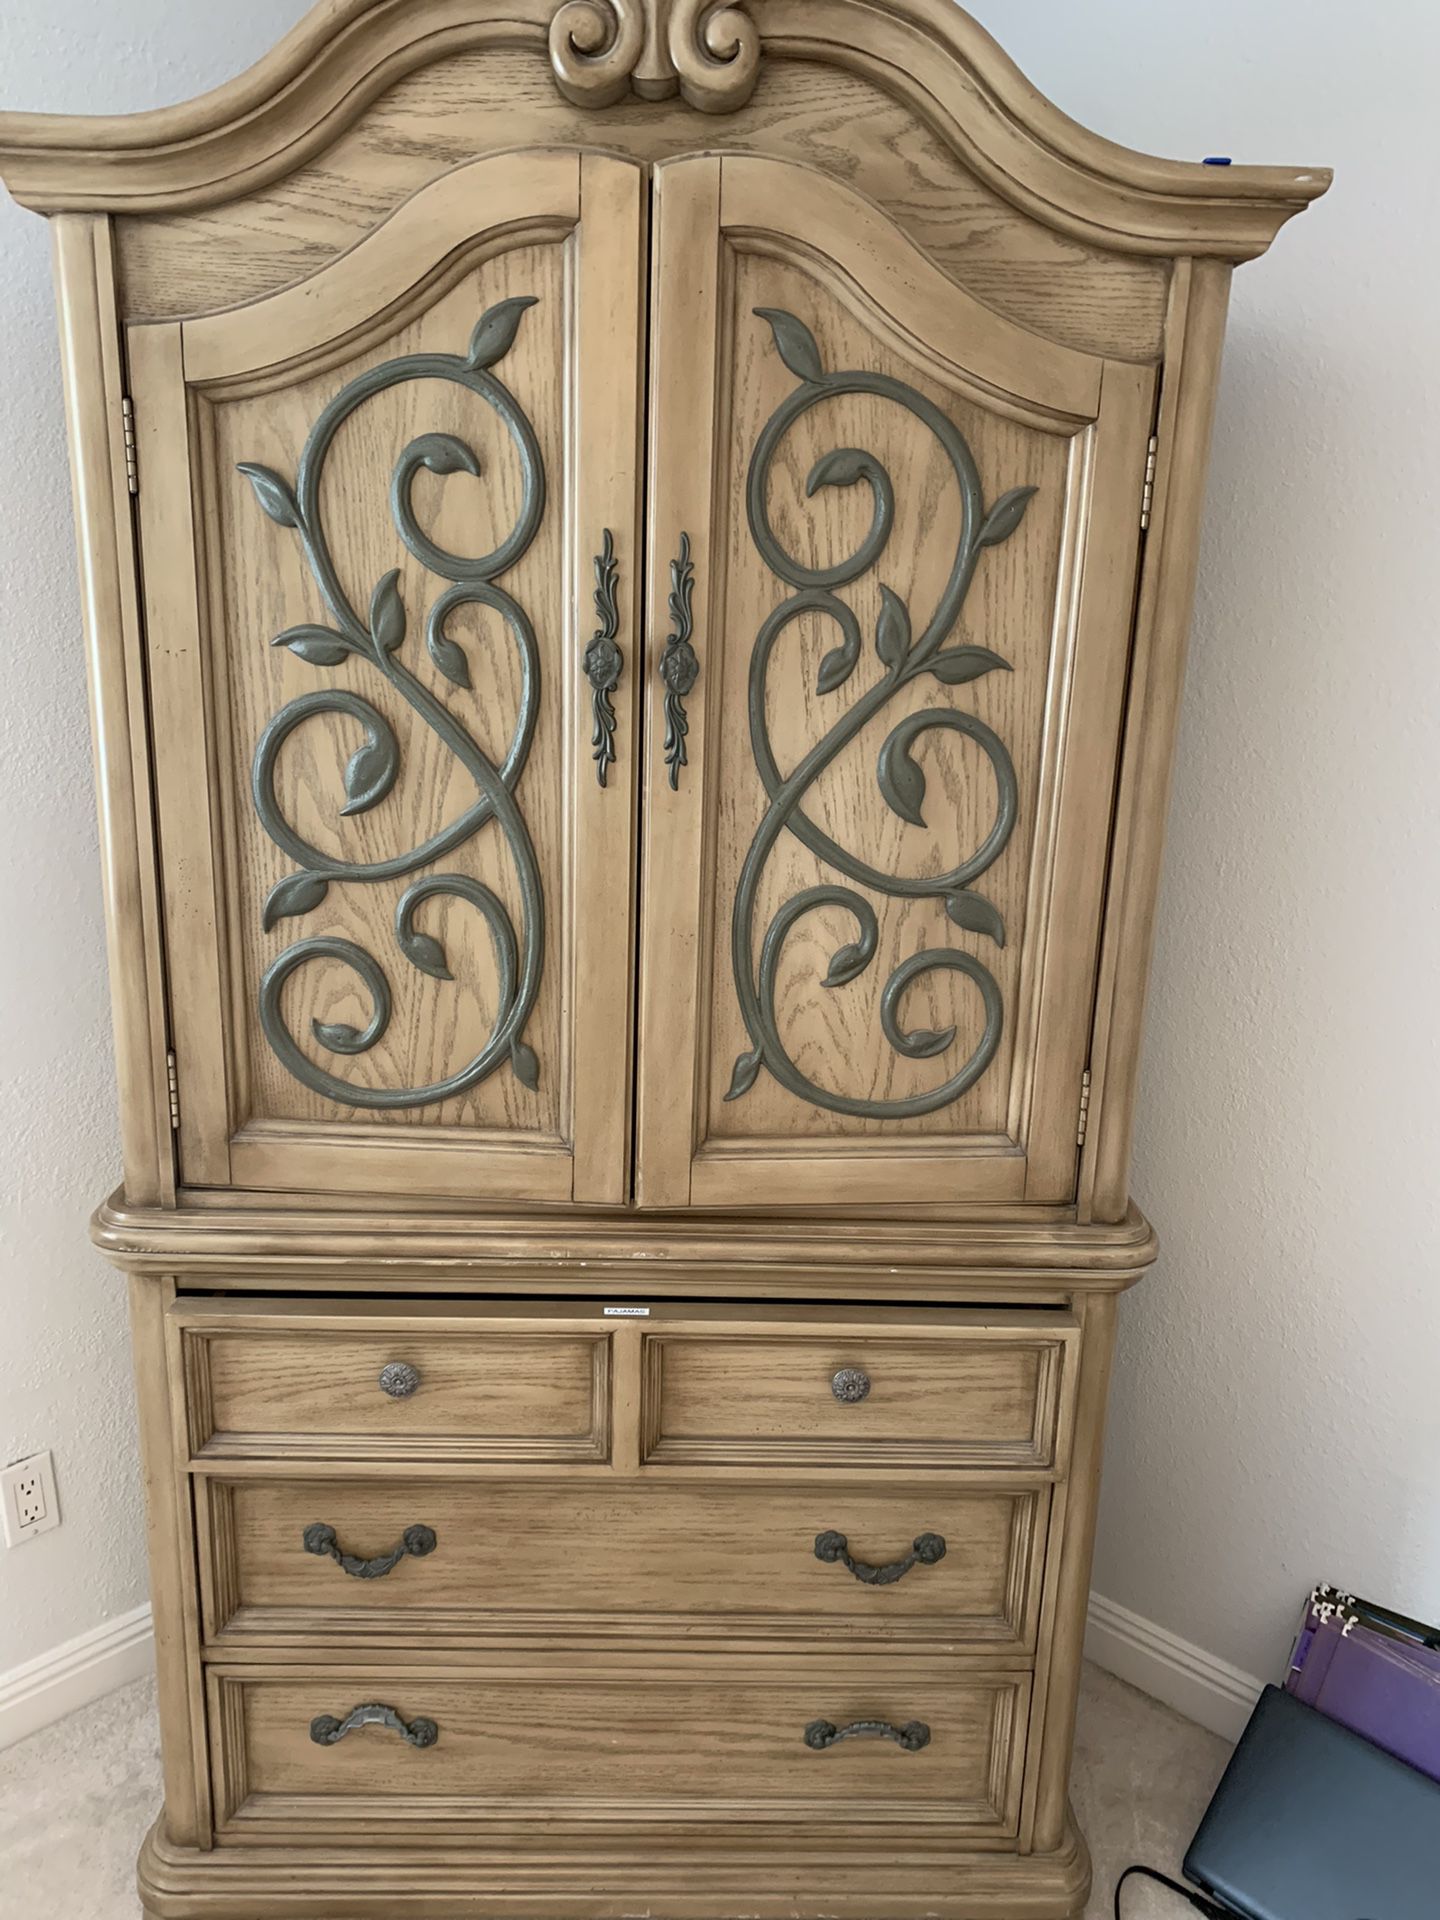 Armoire with 2 shelves that are adjustable on top